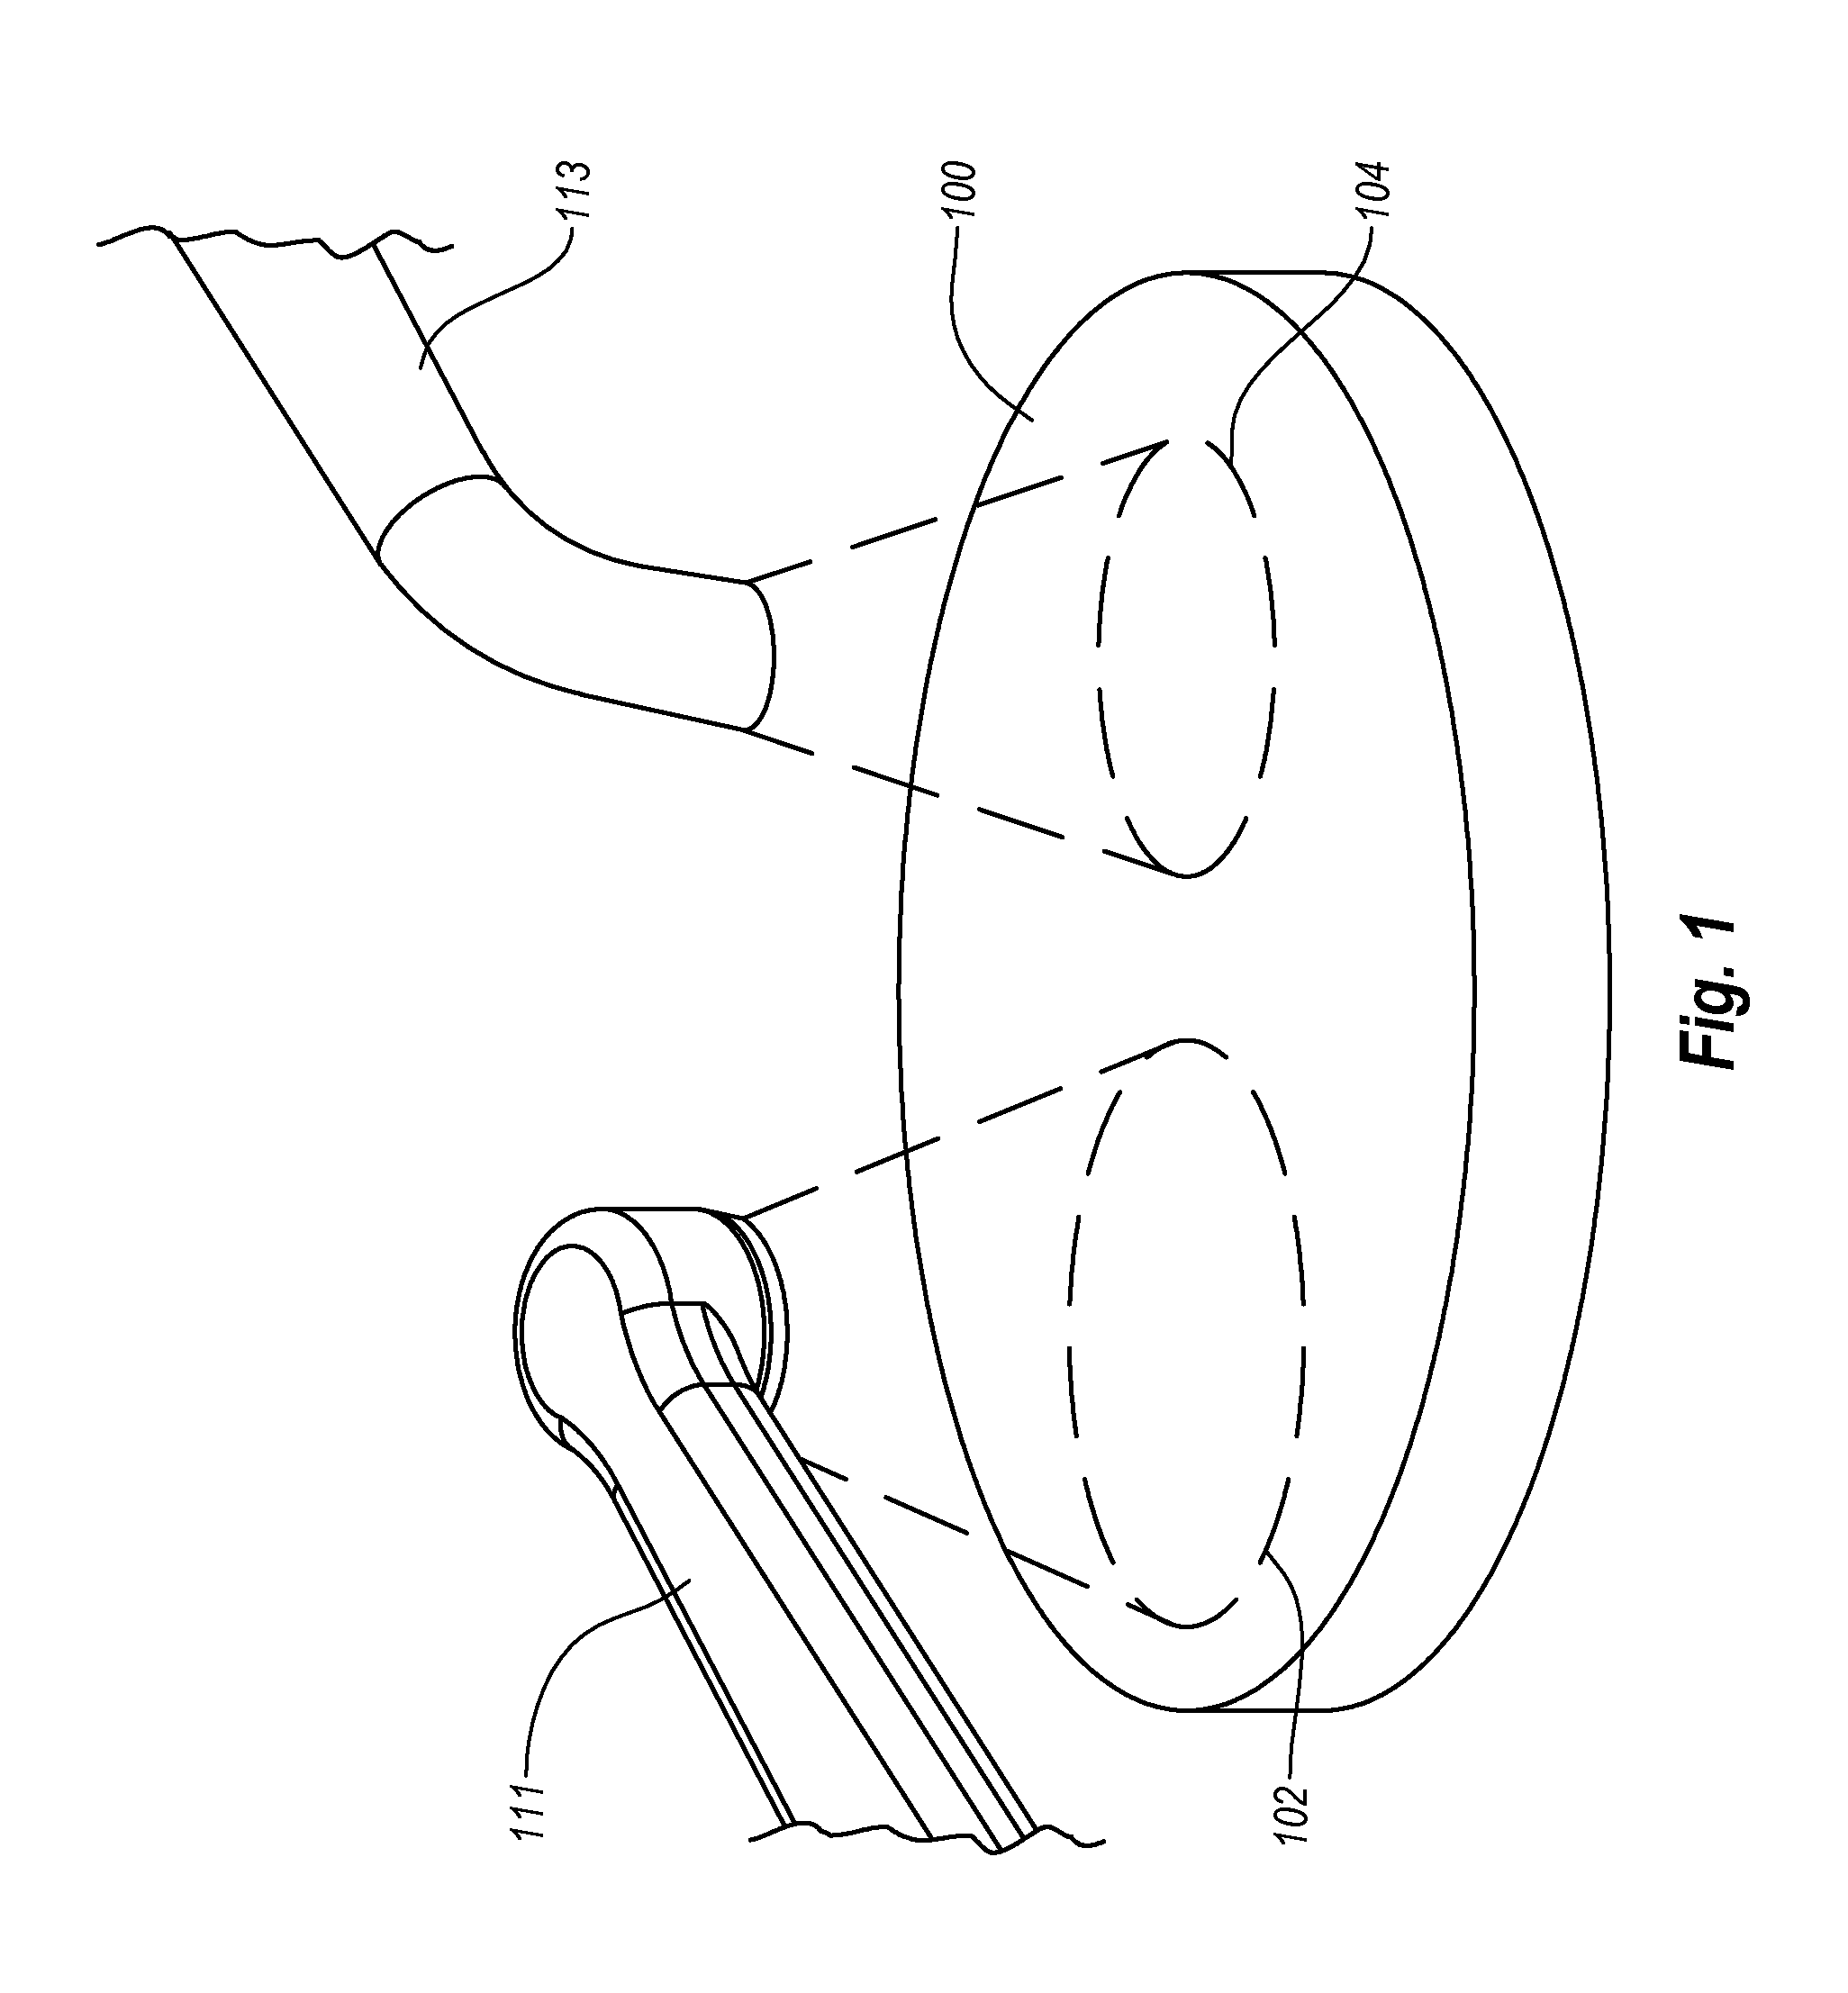 Method for evaluating performance characteristics of dental curing lights